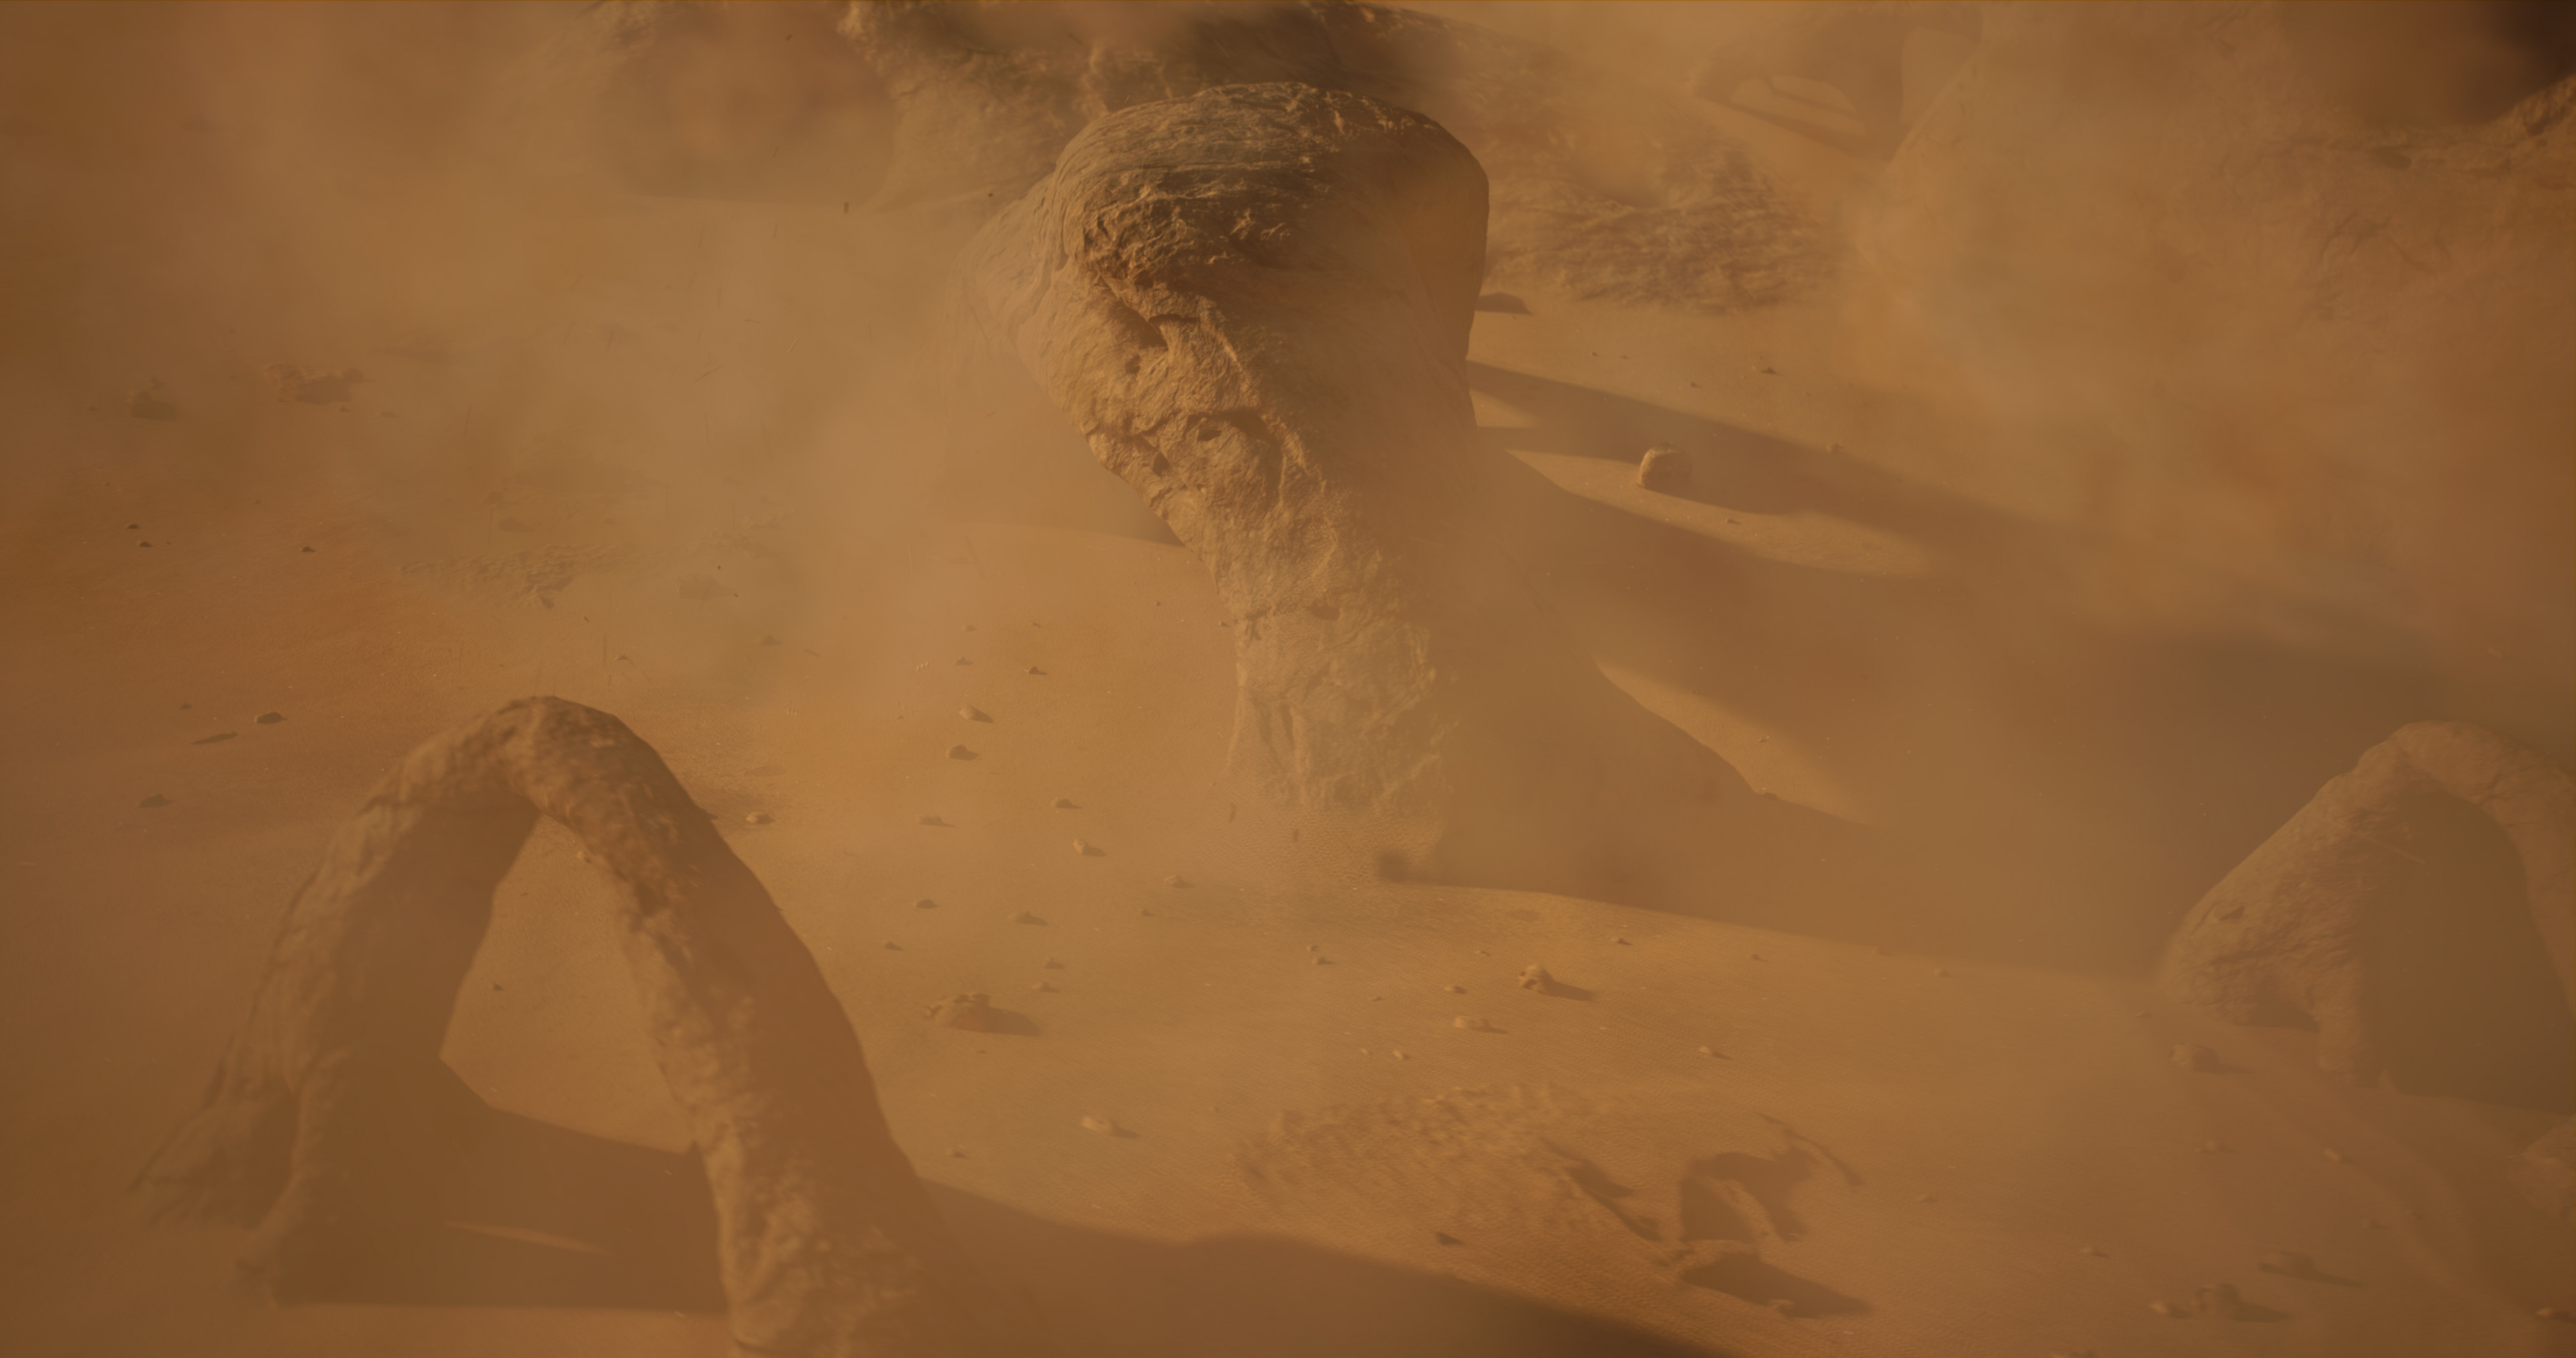 The sand storm was an idea that came later as I was starting to assemble the first few shots.  I ended up building a bunch of Niagara emitters and placing them around for each storm shot.